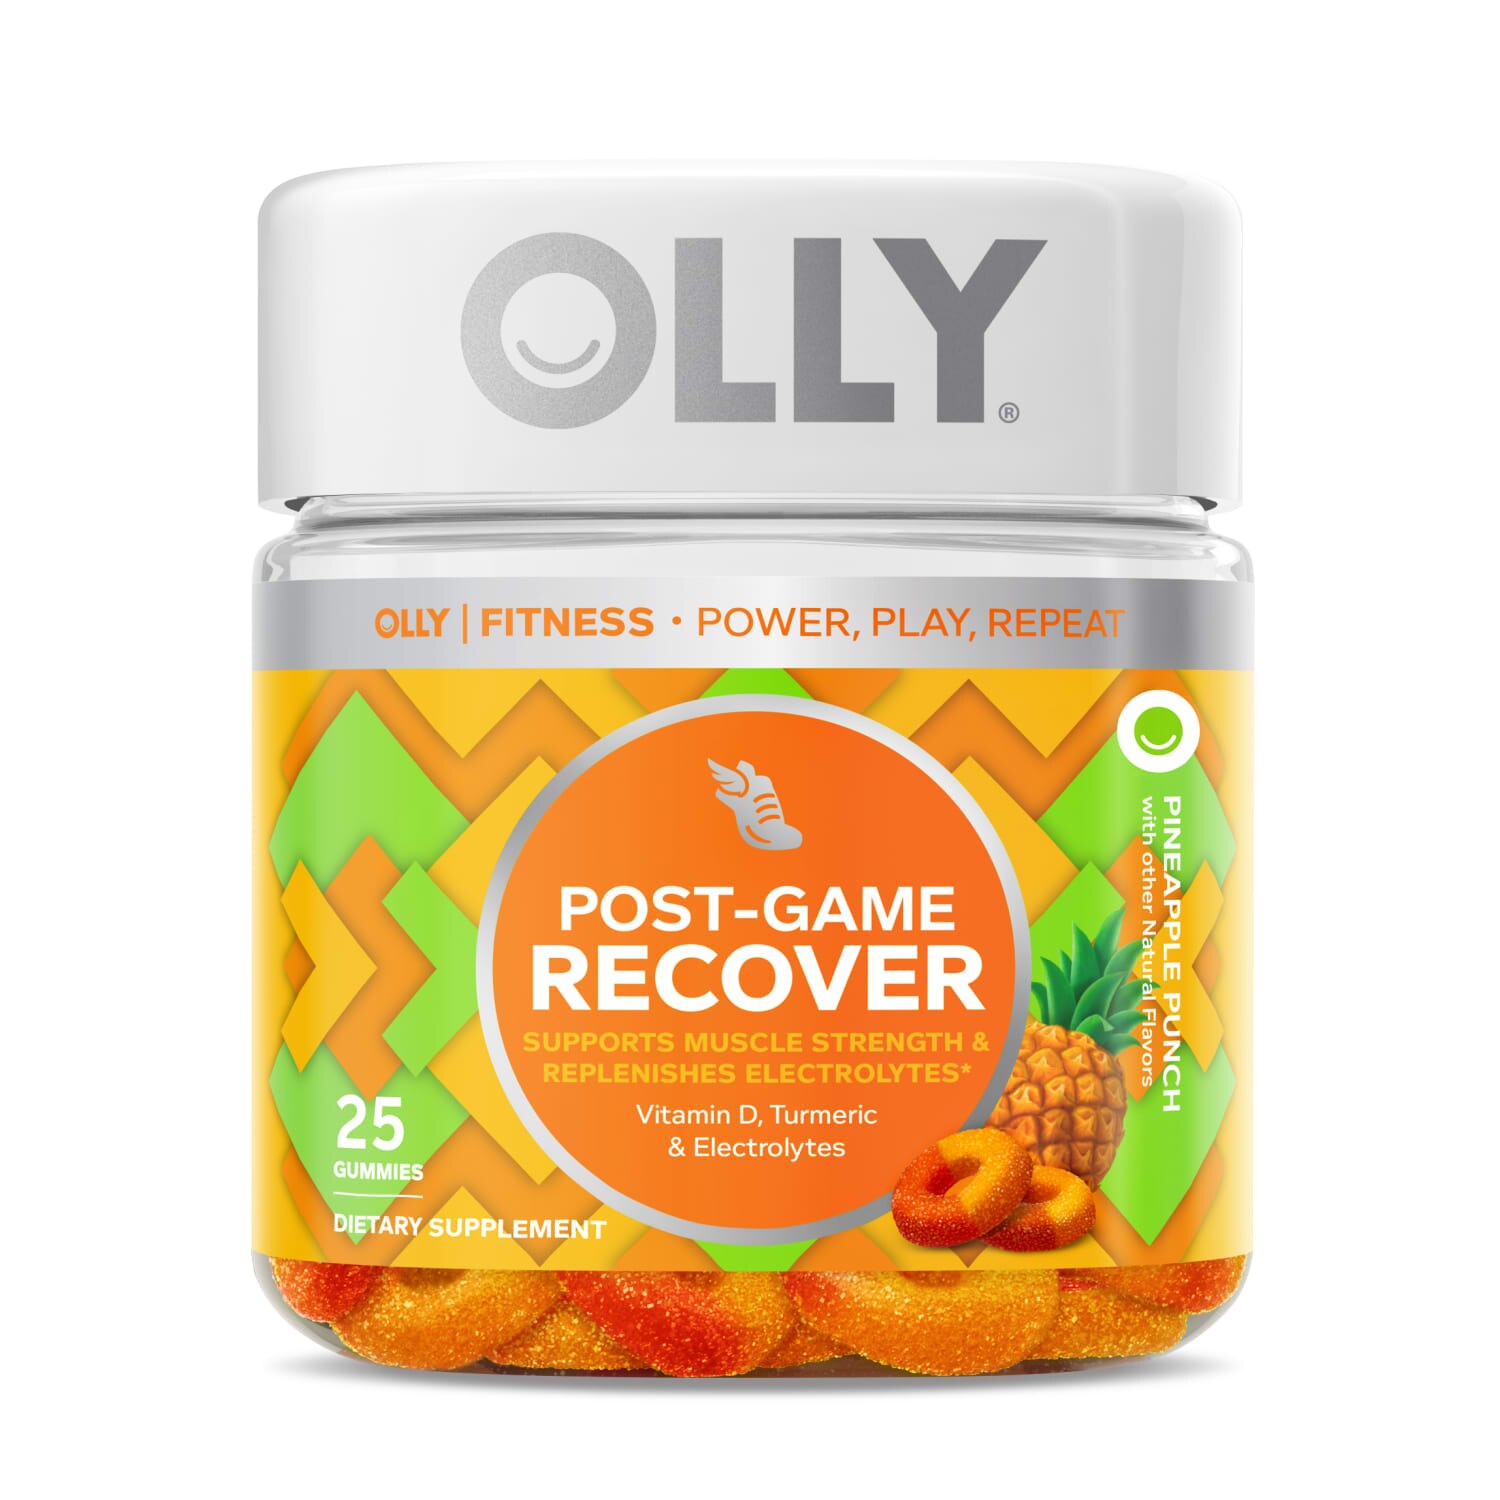 OLLY Post-Game Recover Gluten Free Gummies, Pineapple Flavor, 25 CT